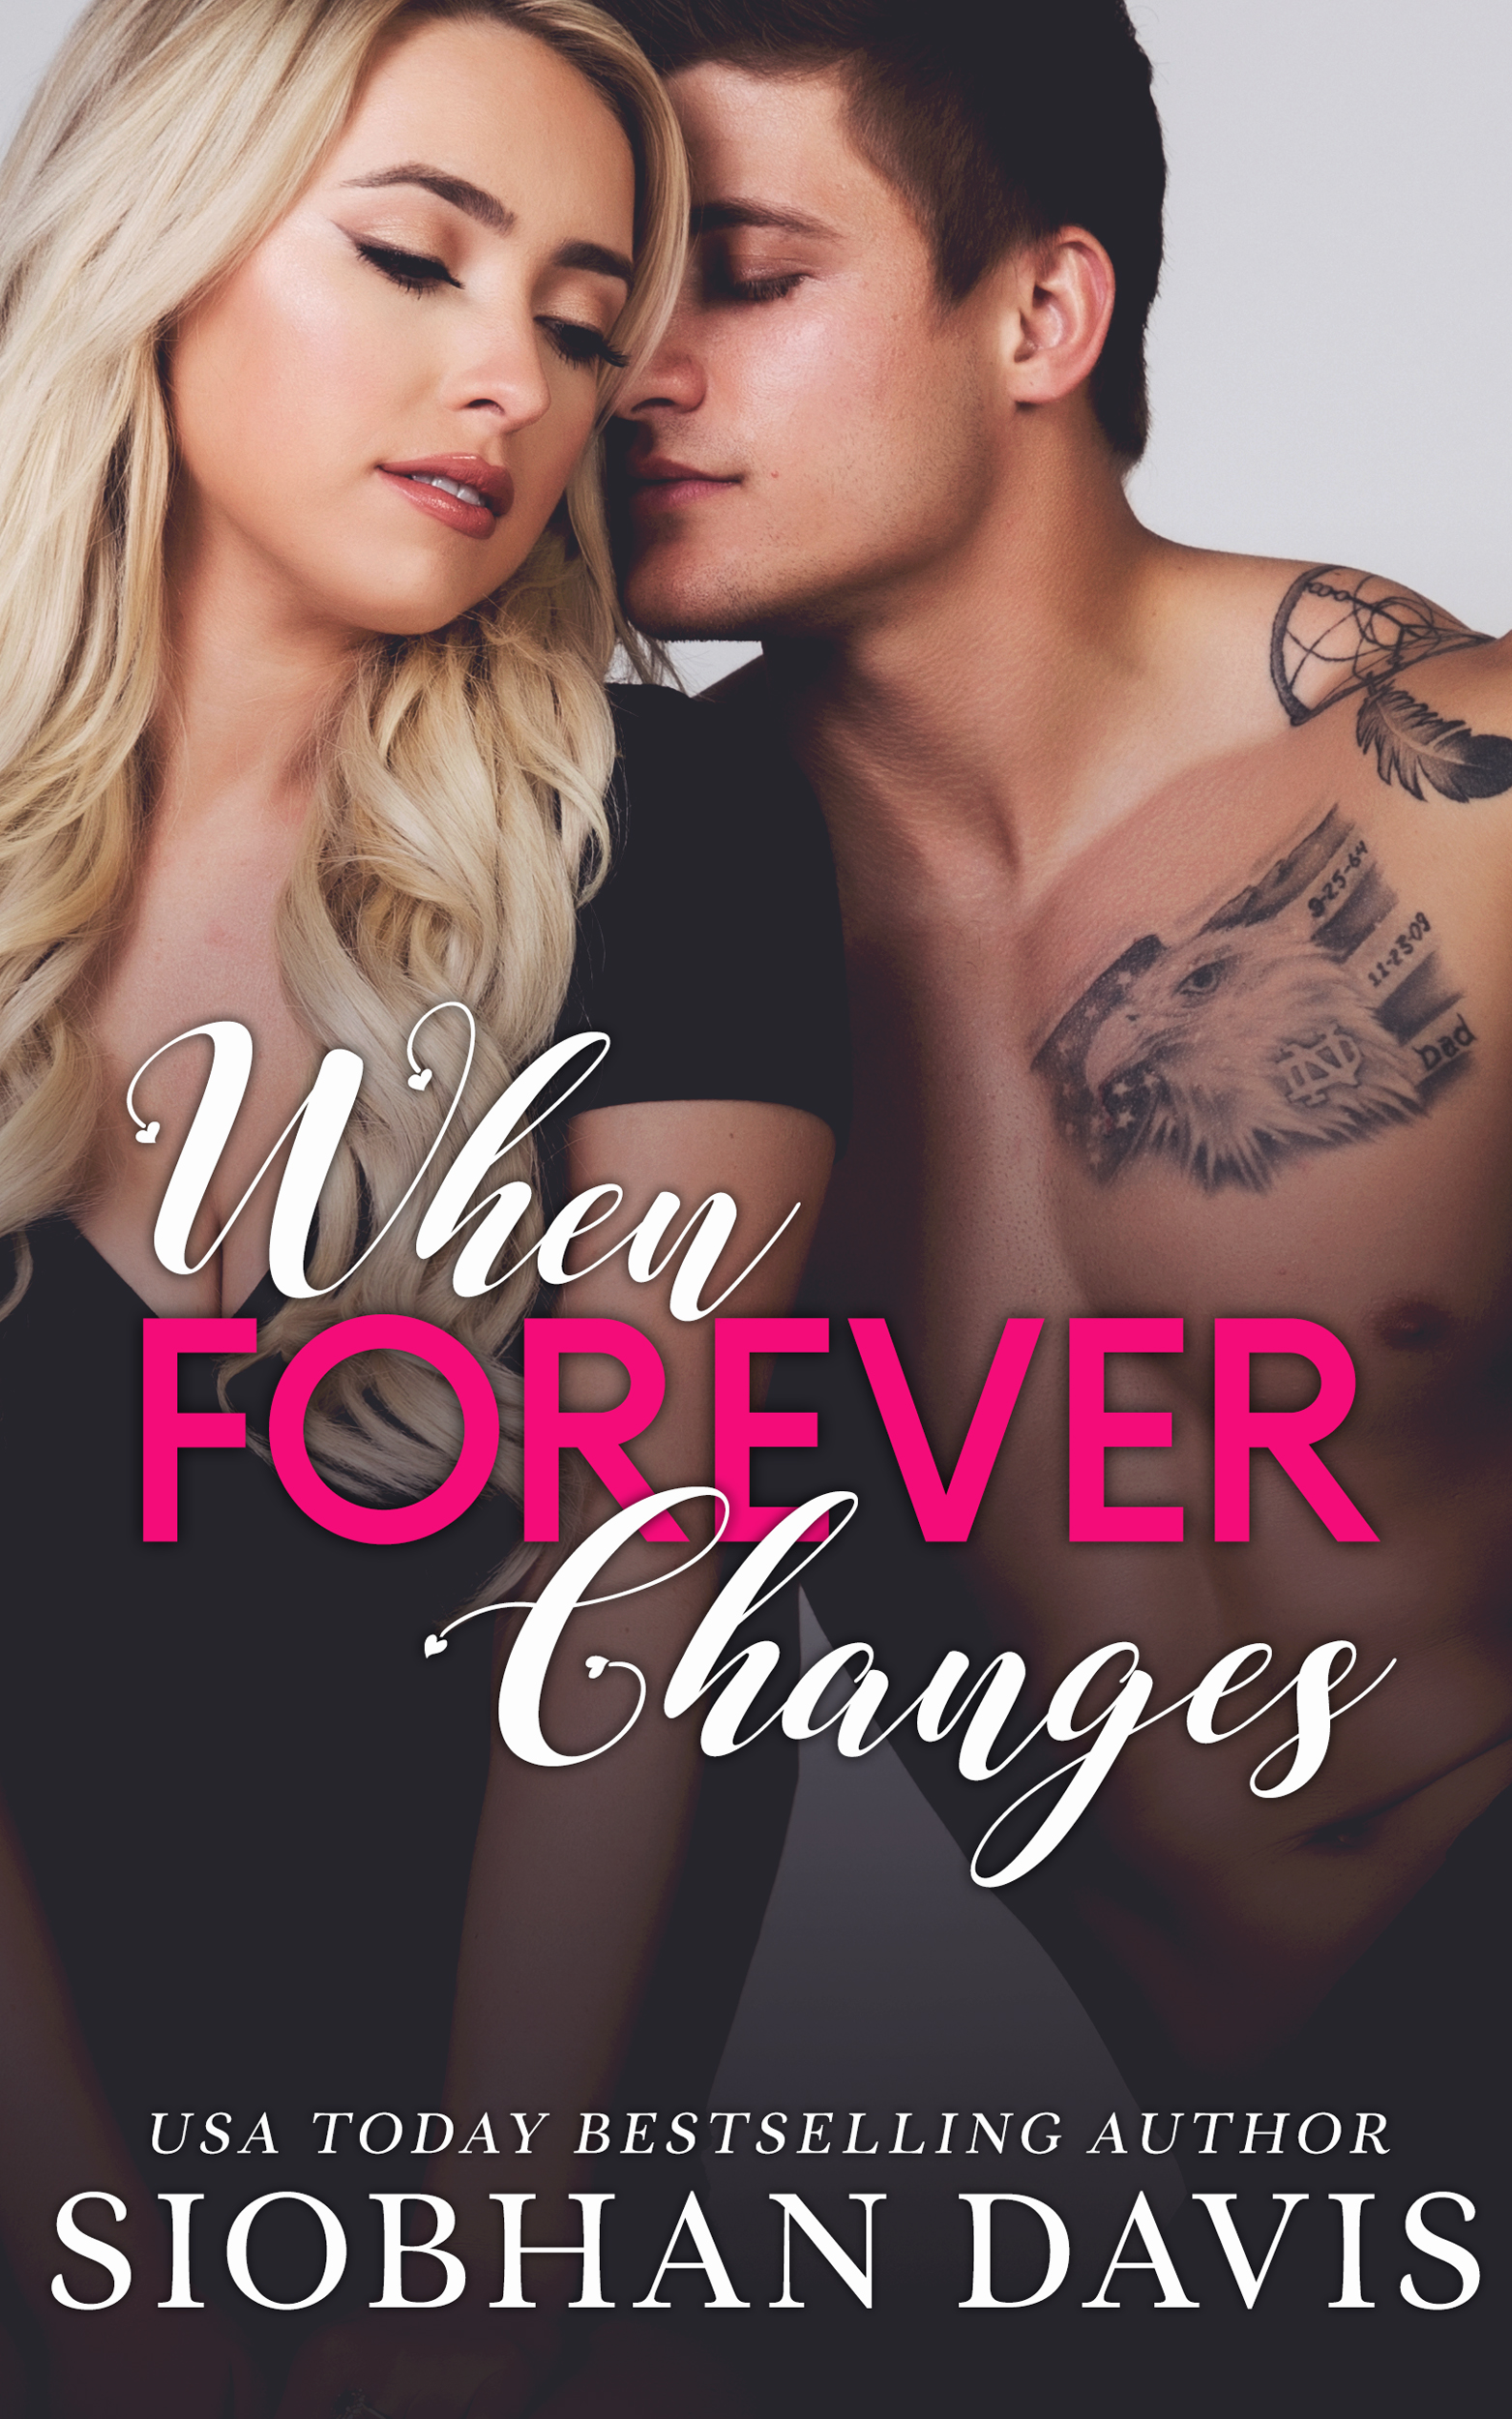 When Forever Changes by Siobhan Davis [Cover Reveal]